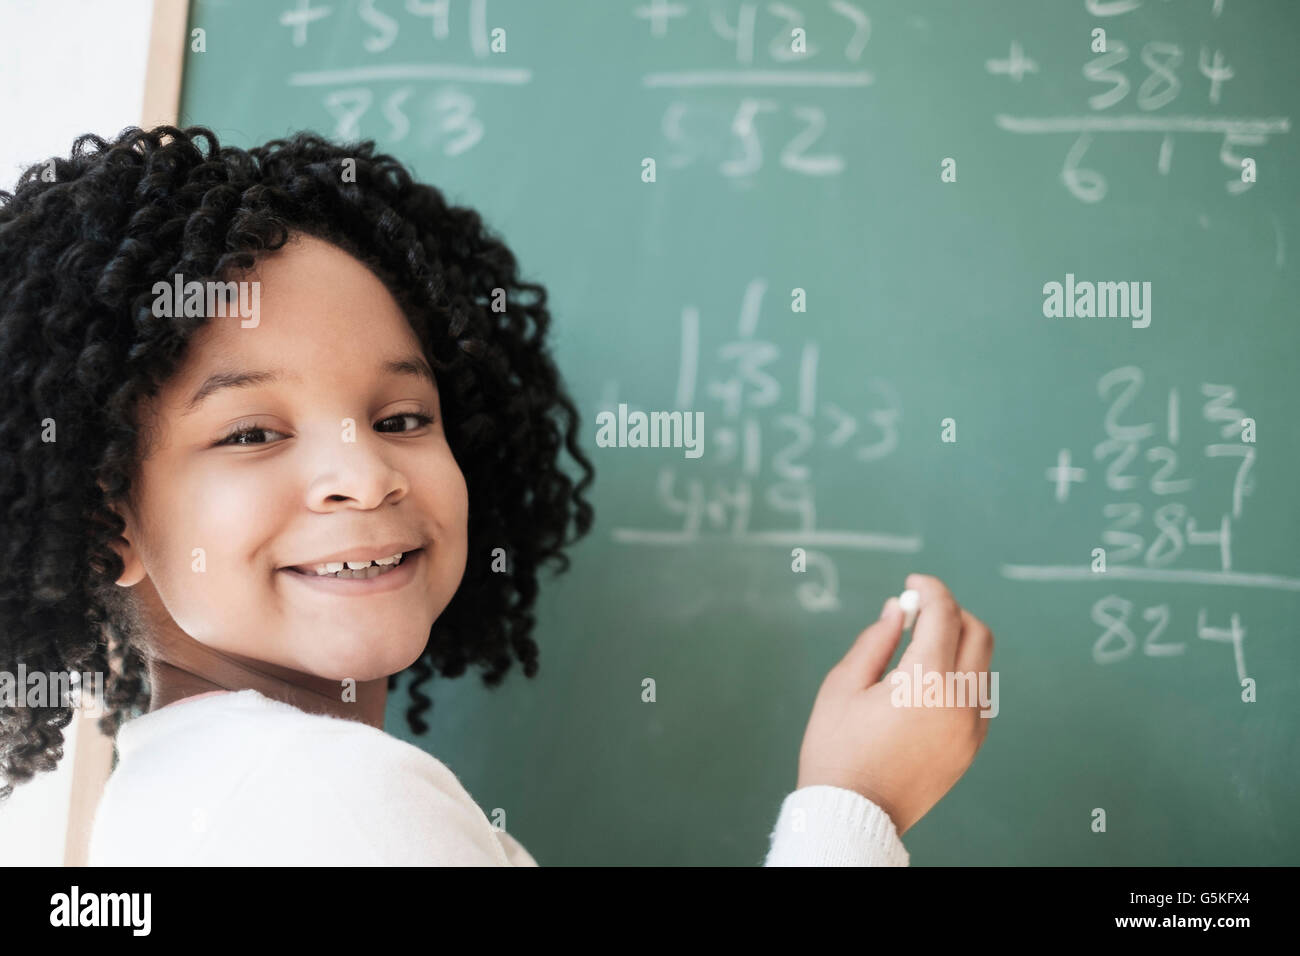 African American student writing on chalkboard in classroom Stock Photo